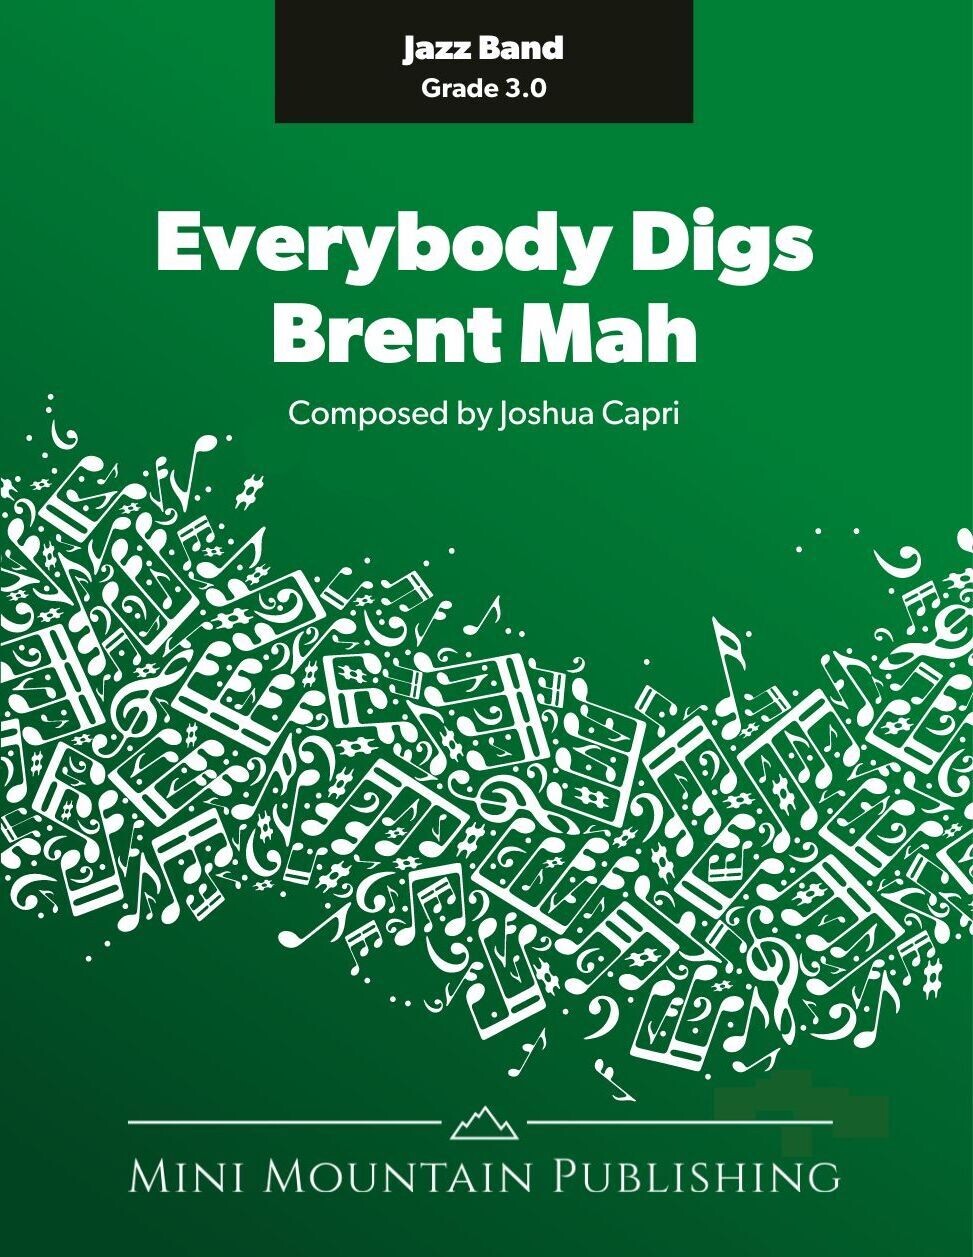 Everybody Digs Brent Mah - Physical Copy